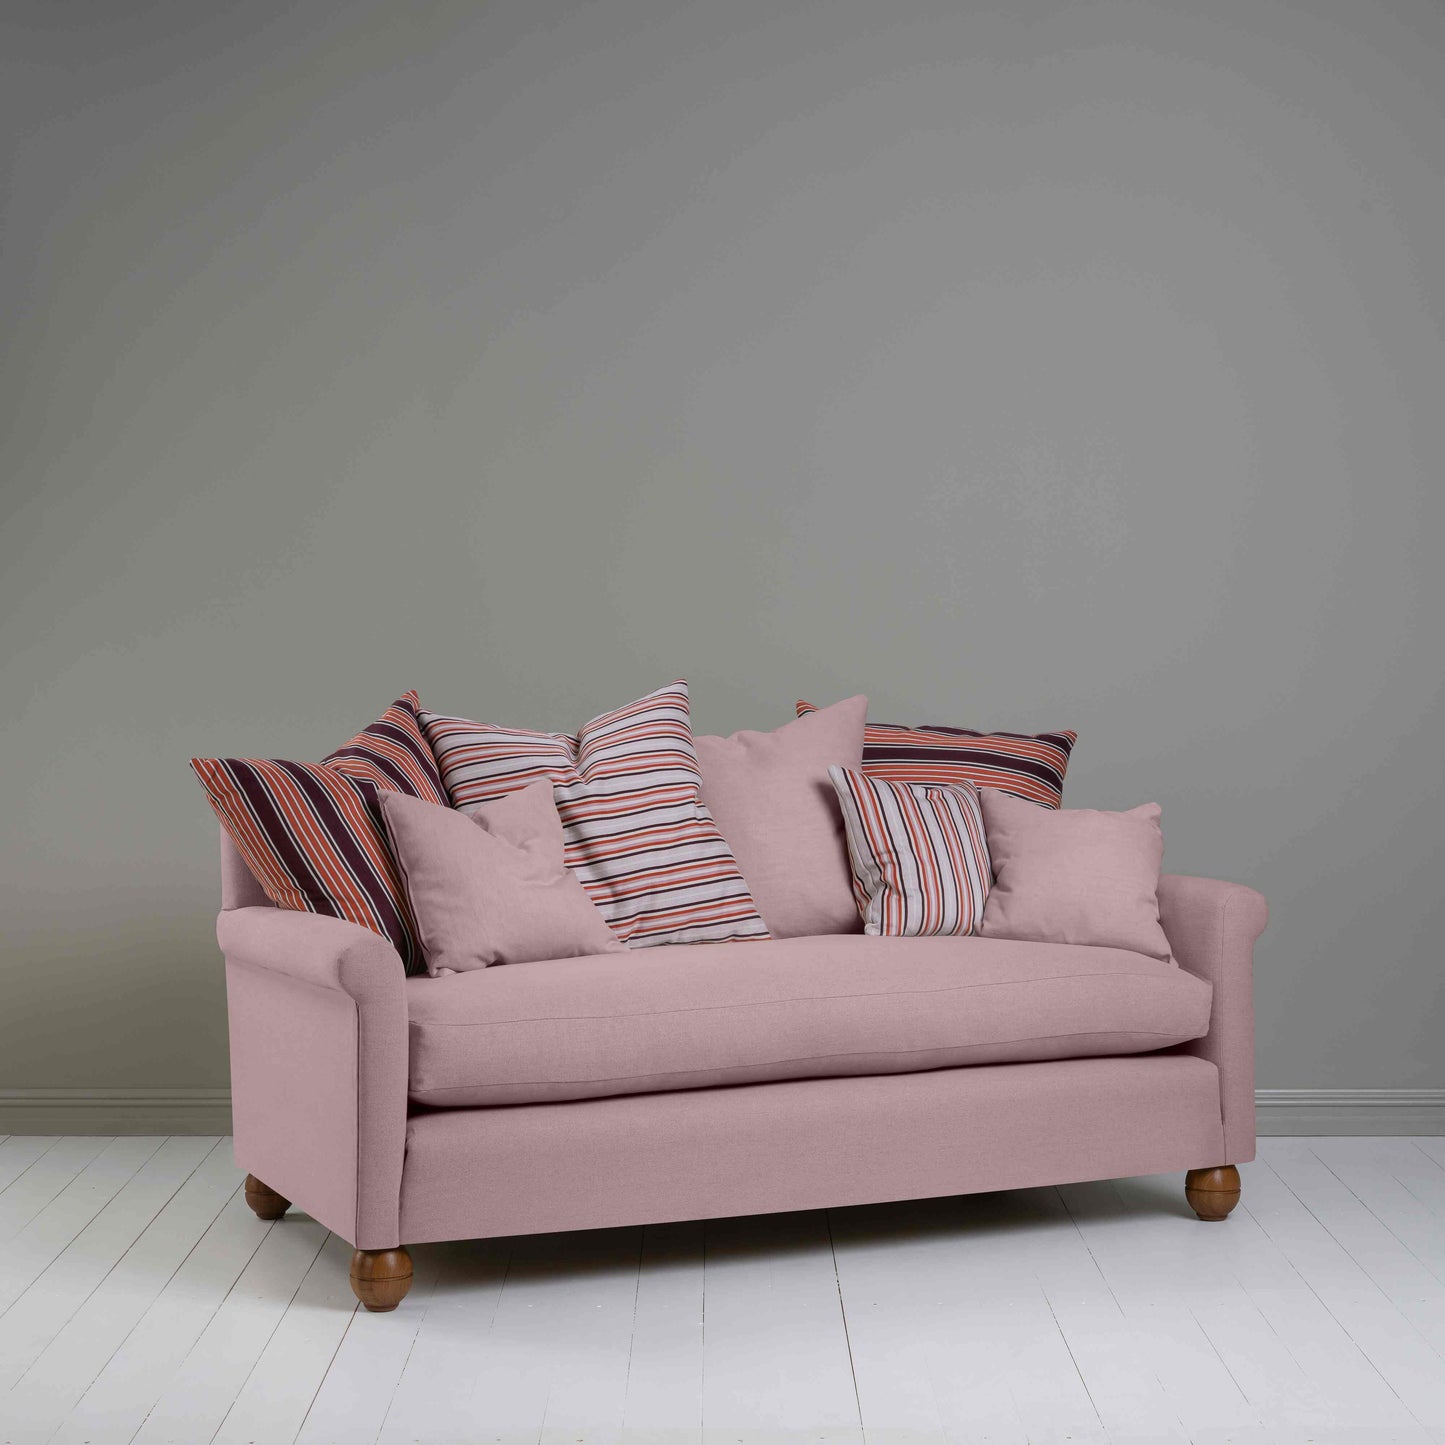 Idler 3 Seater Sofa in Laidback Linen Heather